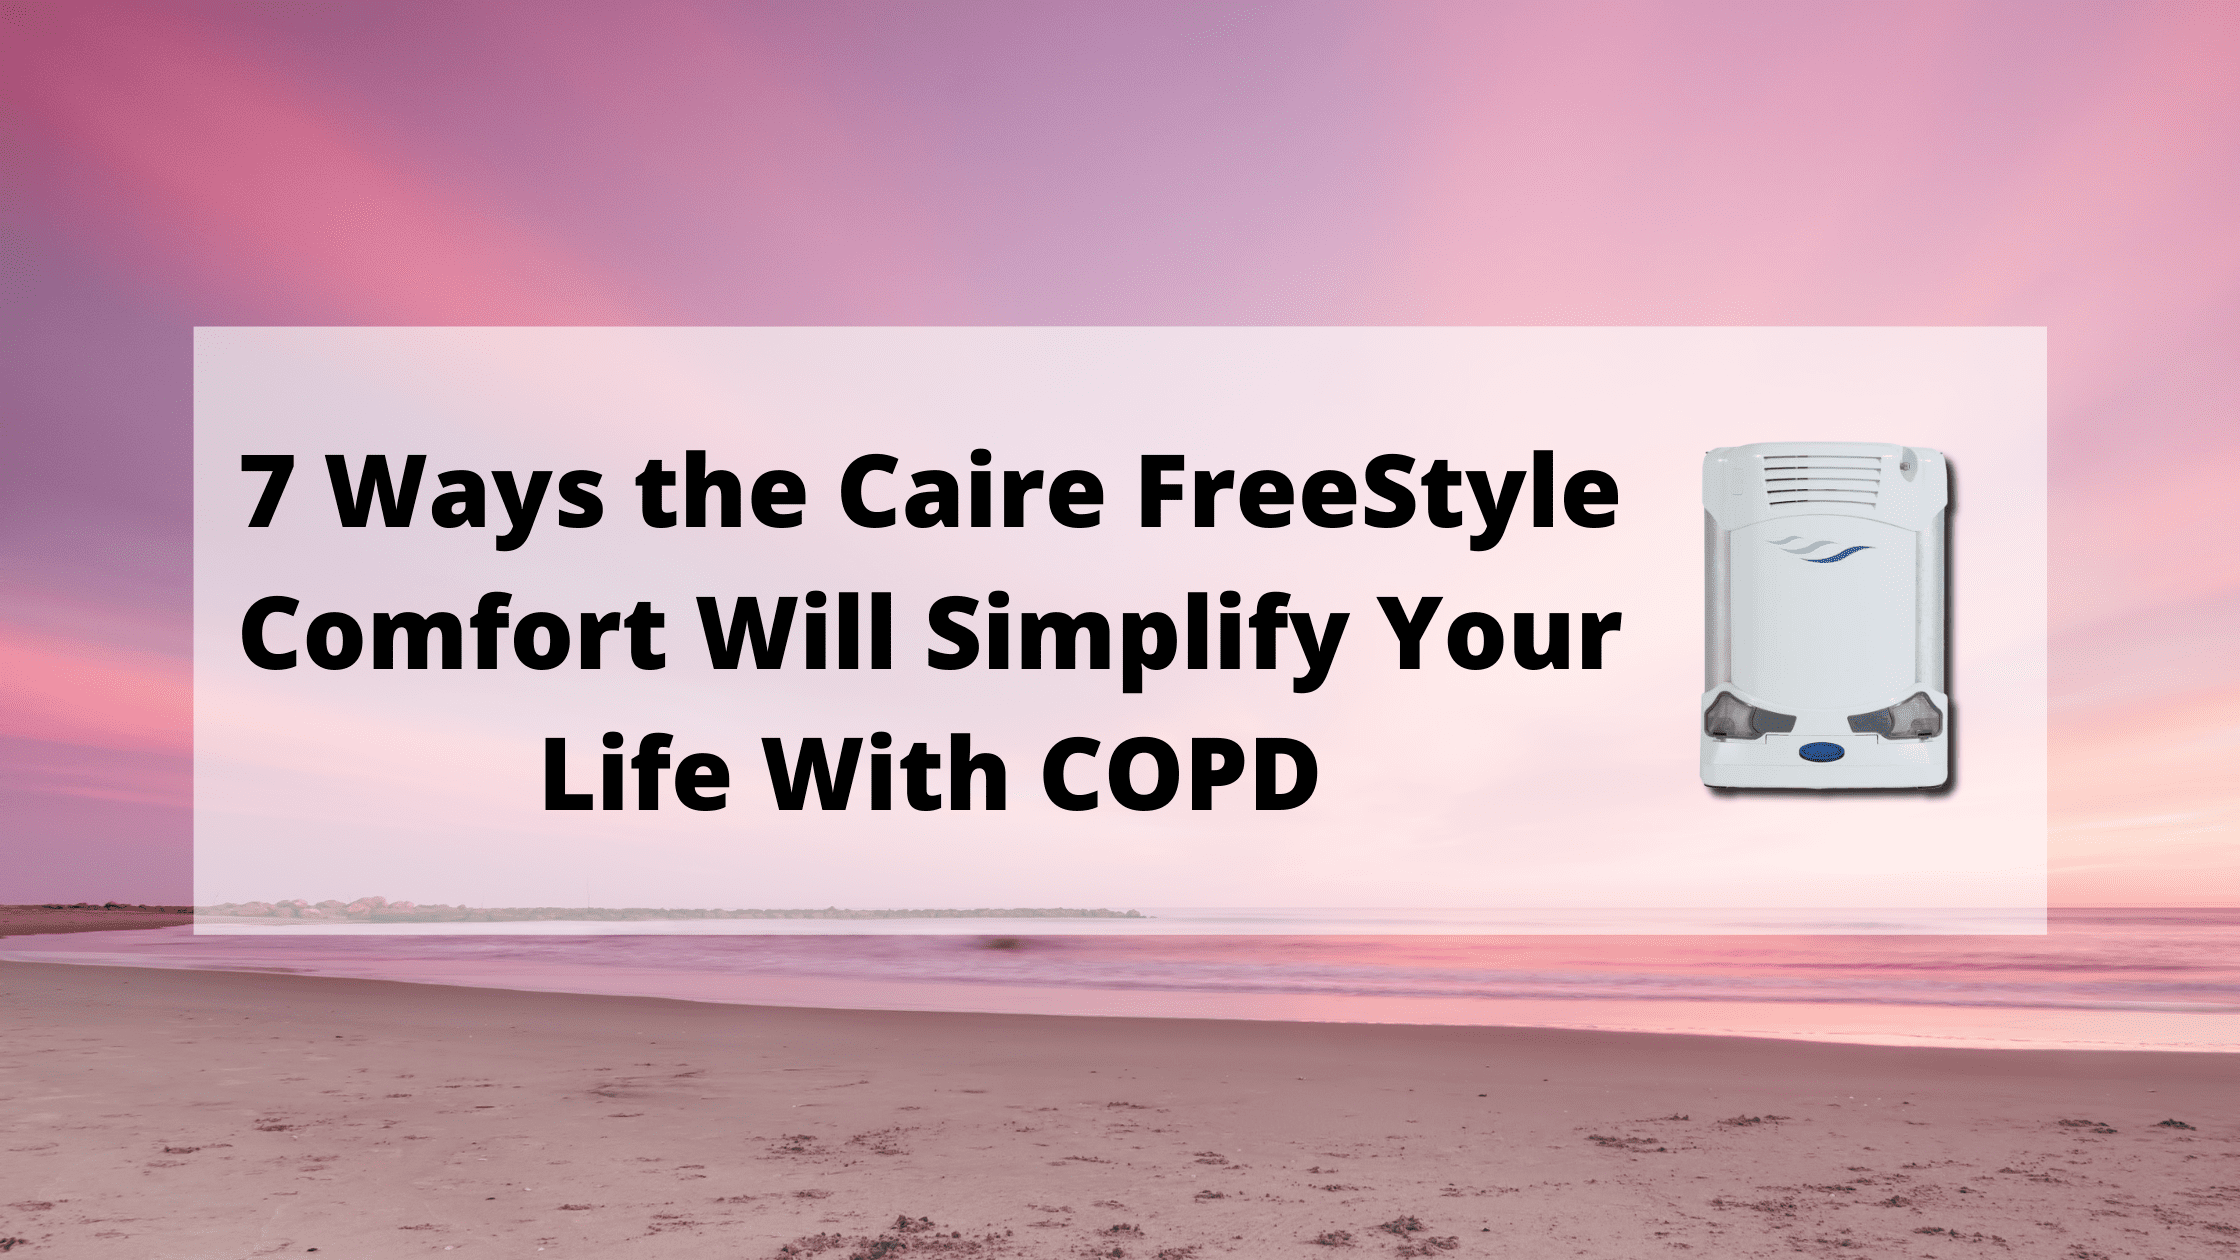 7 Ways the Caire FreeStyle Comfort Will Simplify Your Life With COPD